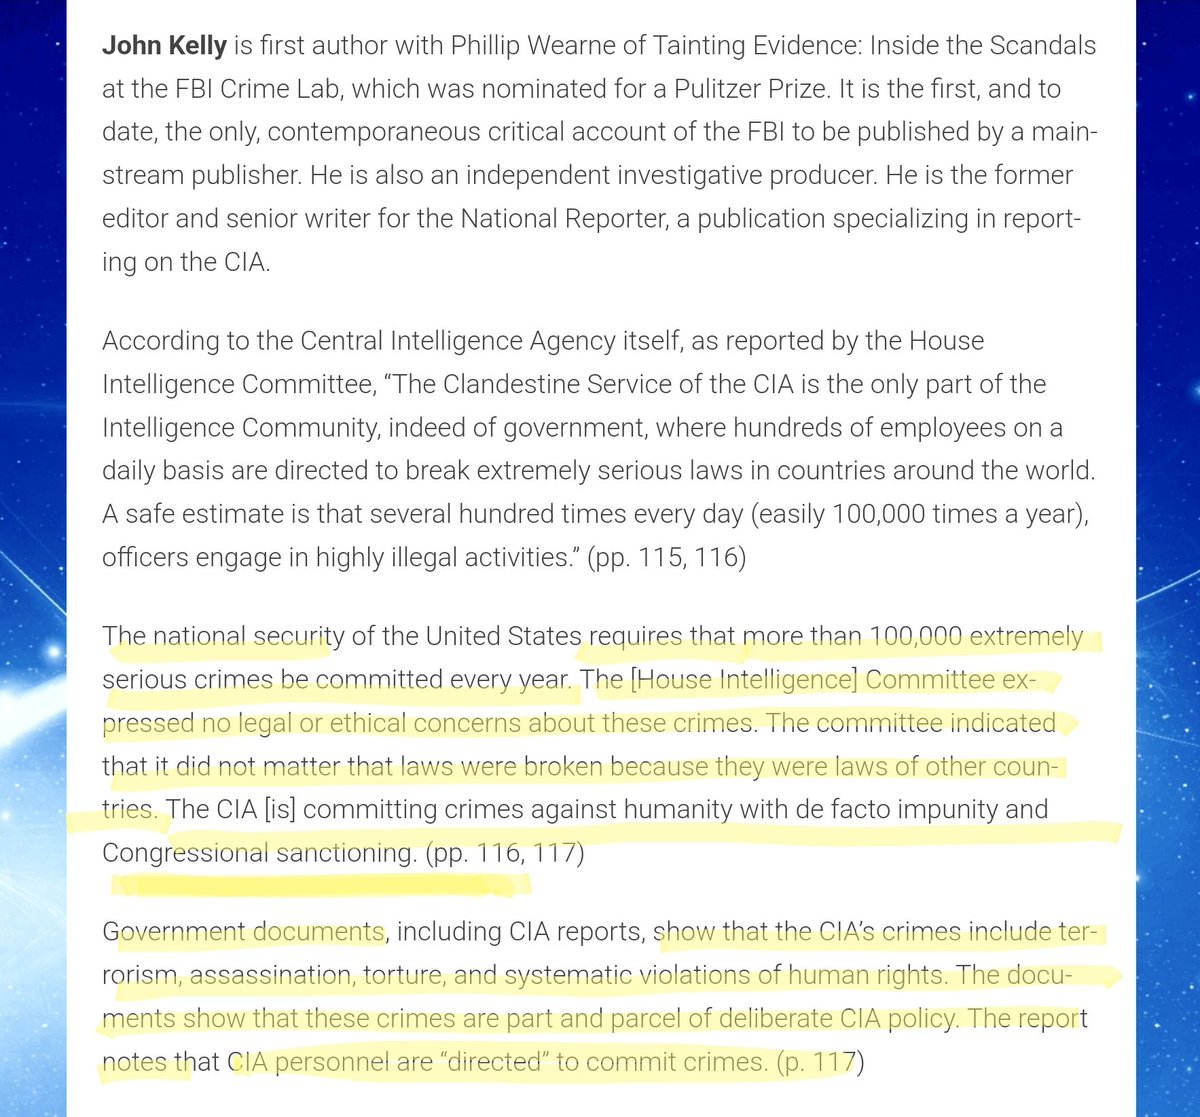 Passing along excerpts: According to the Central Intelligence Agency itself, as reported by the House Intelligence Committee, “The Clandestine Service of the CIA is the only part of the Intelligence Community, indeed of government... https://eraoflight.com/2020/09/12/top-journalists-expose-major-cover-ups-in-mass-media/